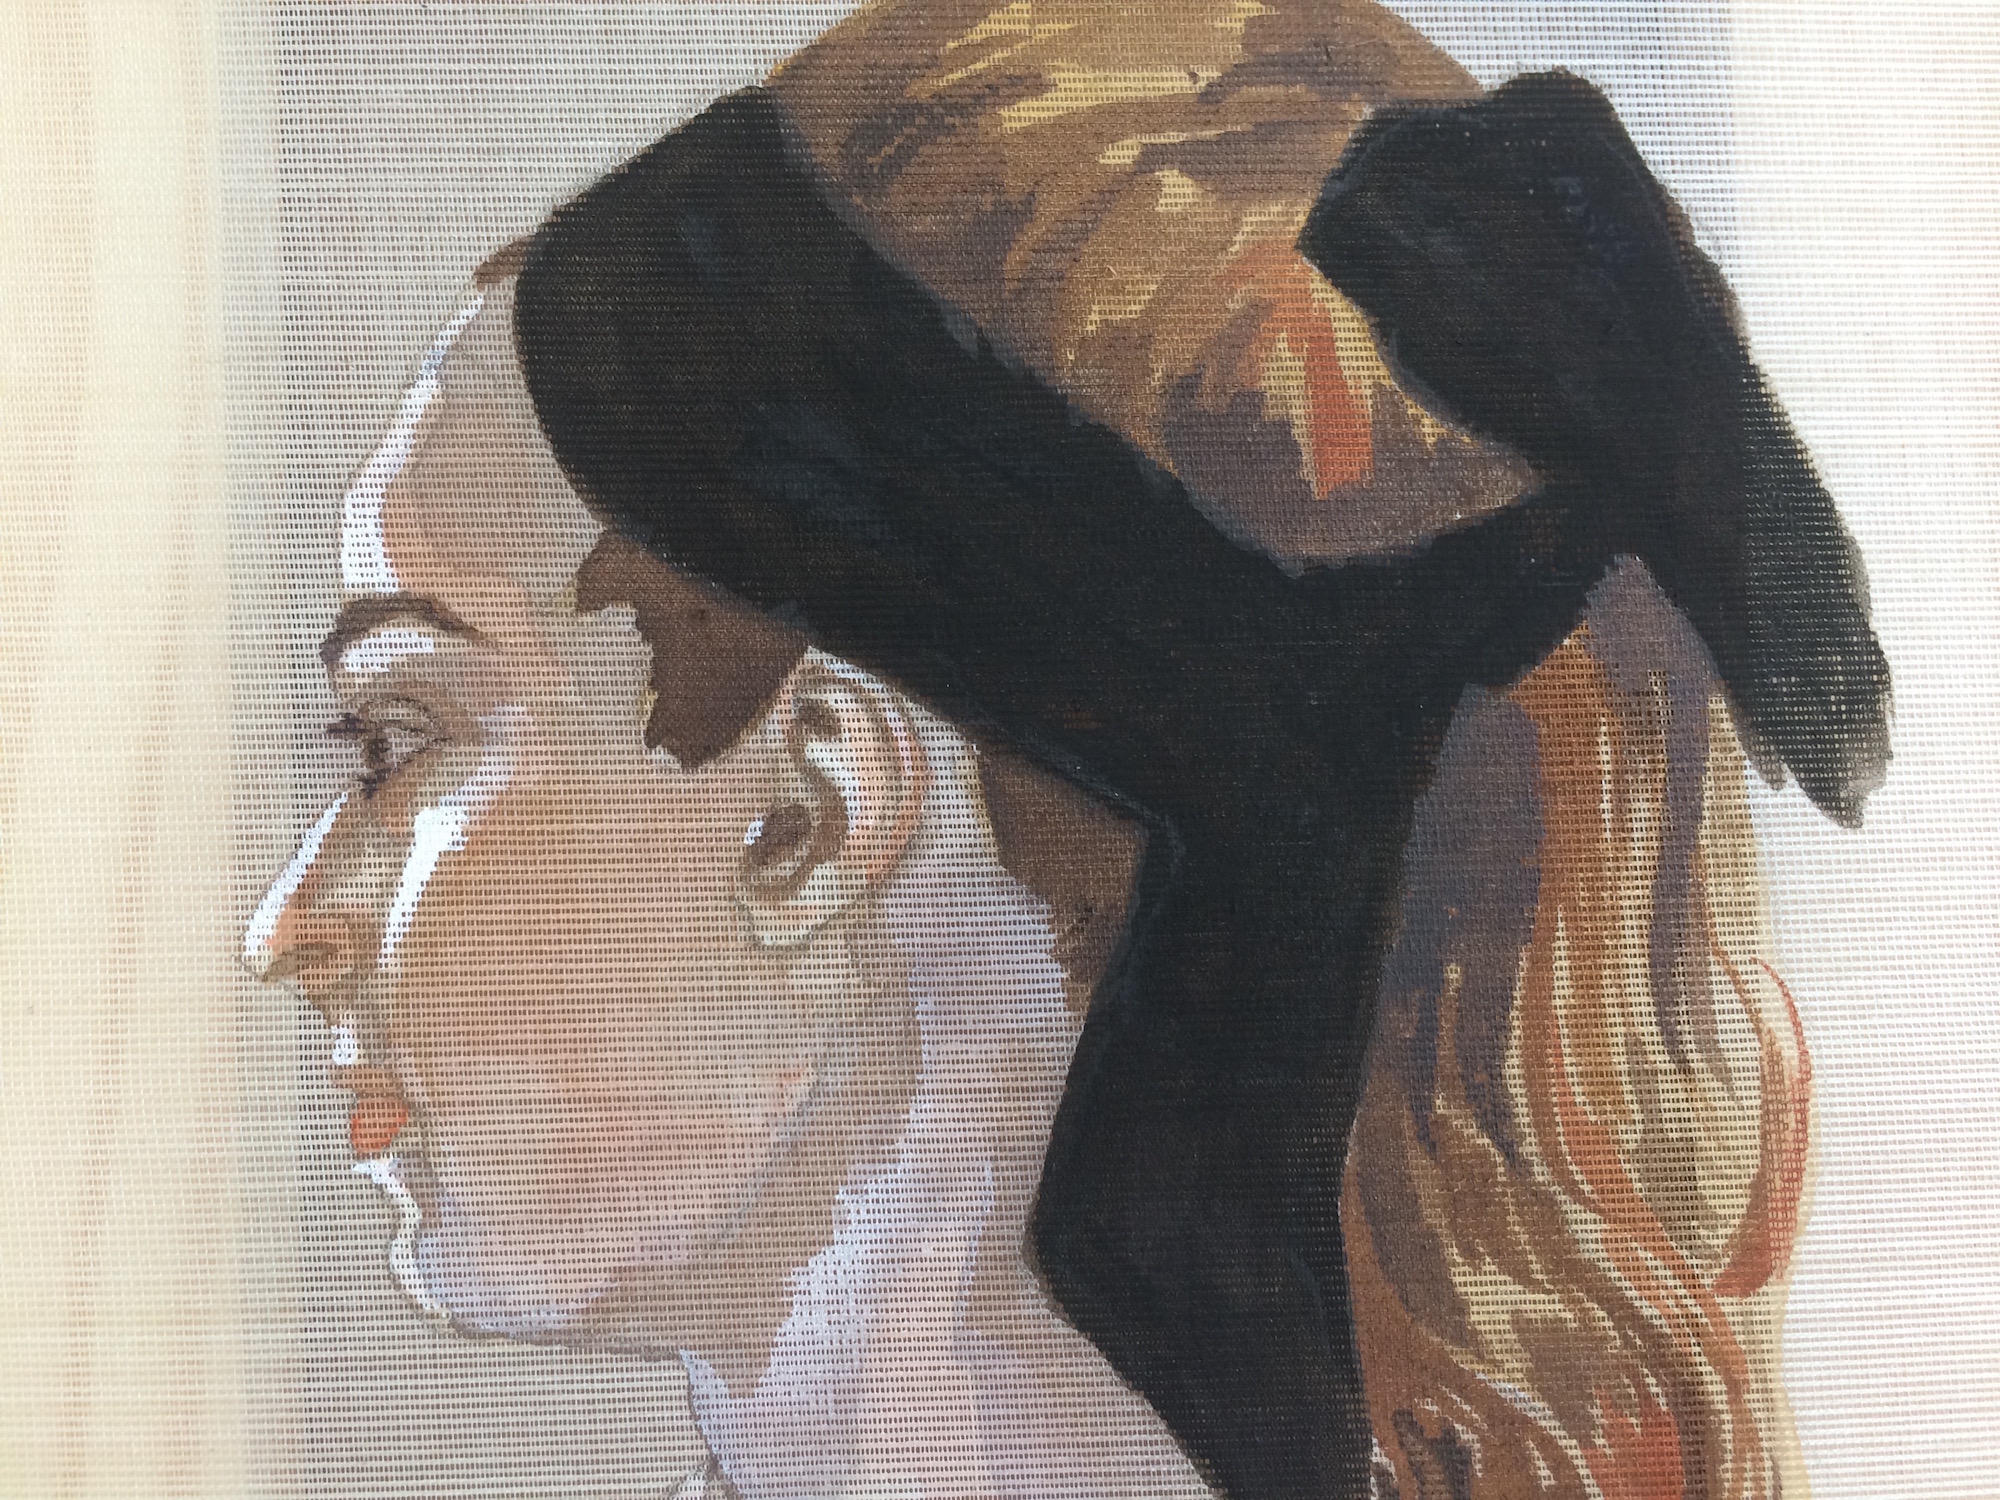 Profile of a Woman with Black Band